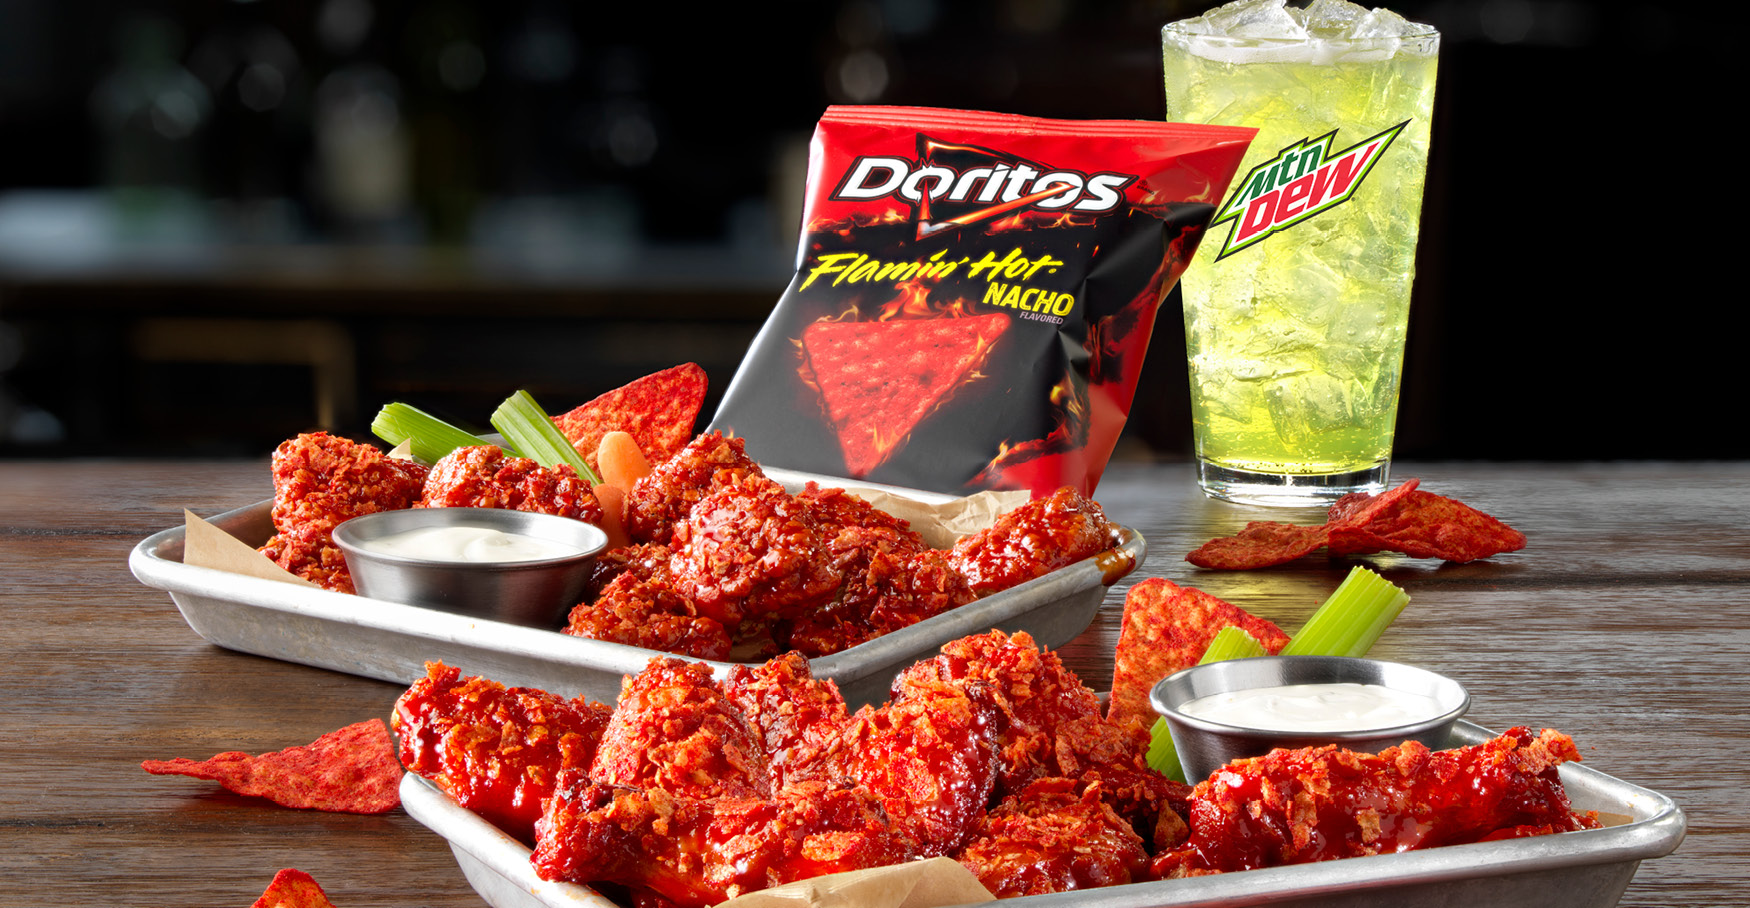 Buffalo Wild Wings And Doritos Fan The Flames Of Flavor With The Launch 